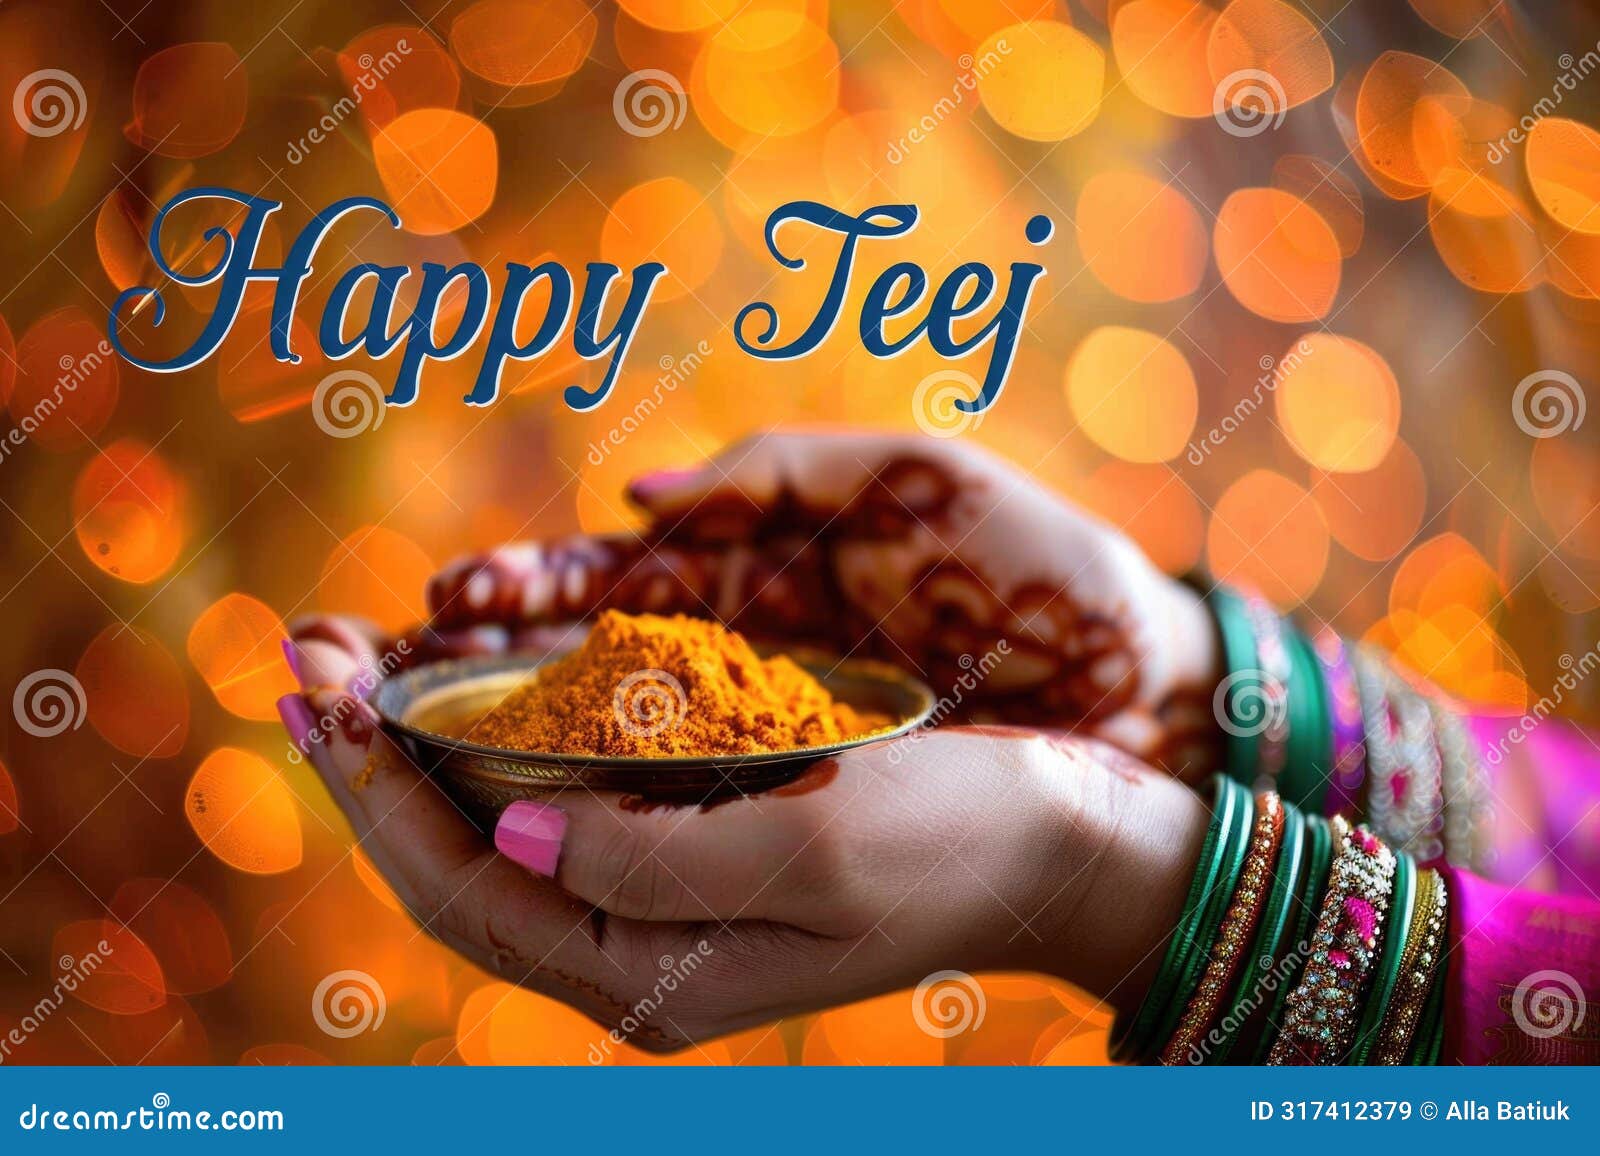 teej jubilation: happy teej - embrace the spirit of teej with exuberant celebrations filled with music, dance and